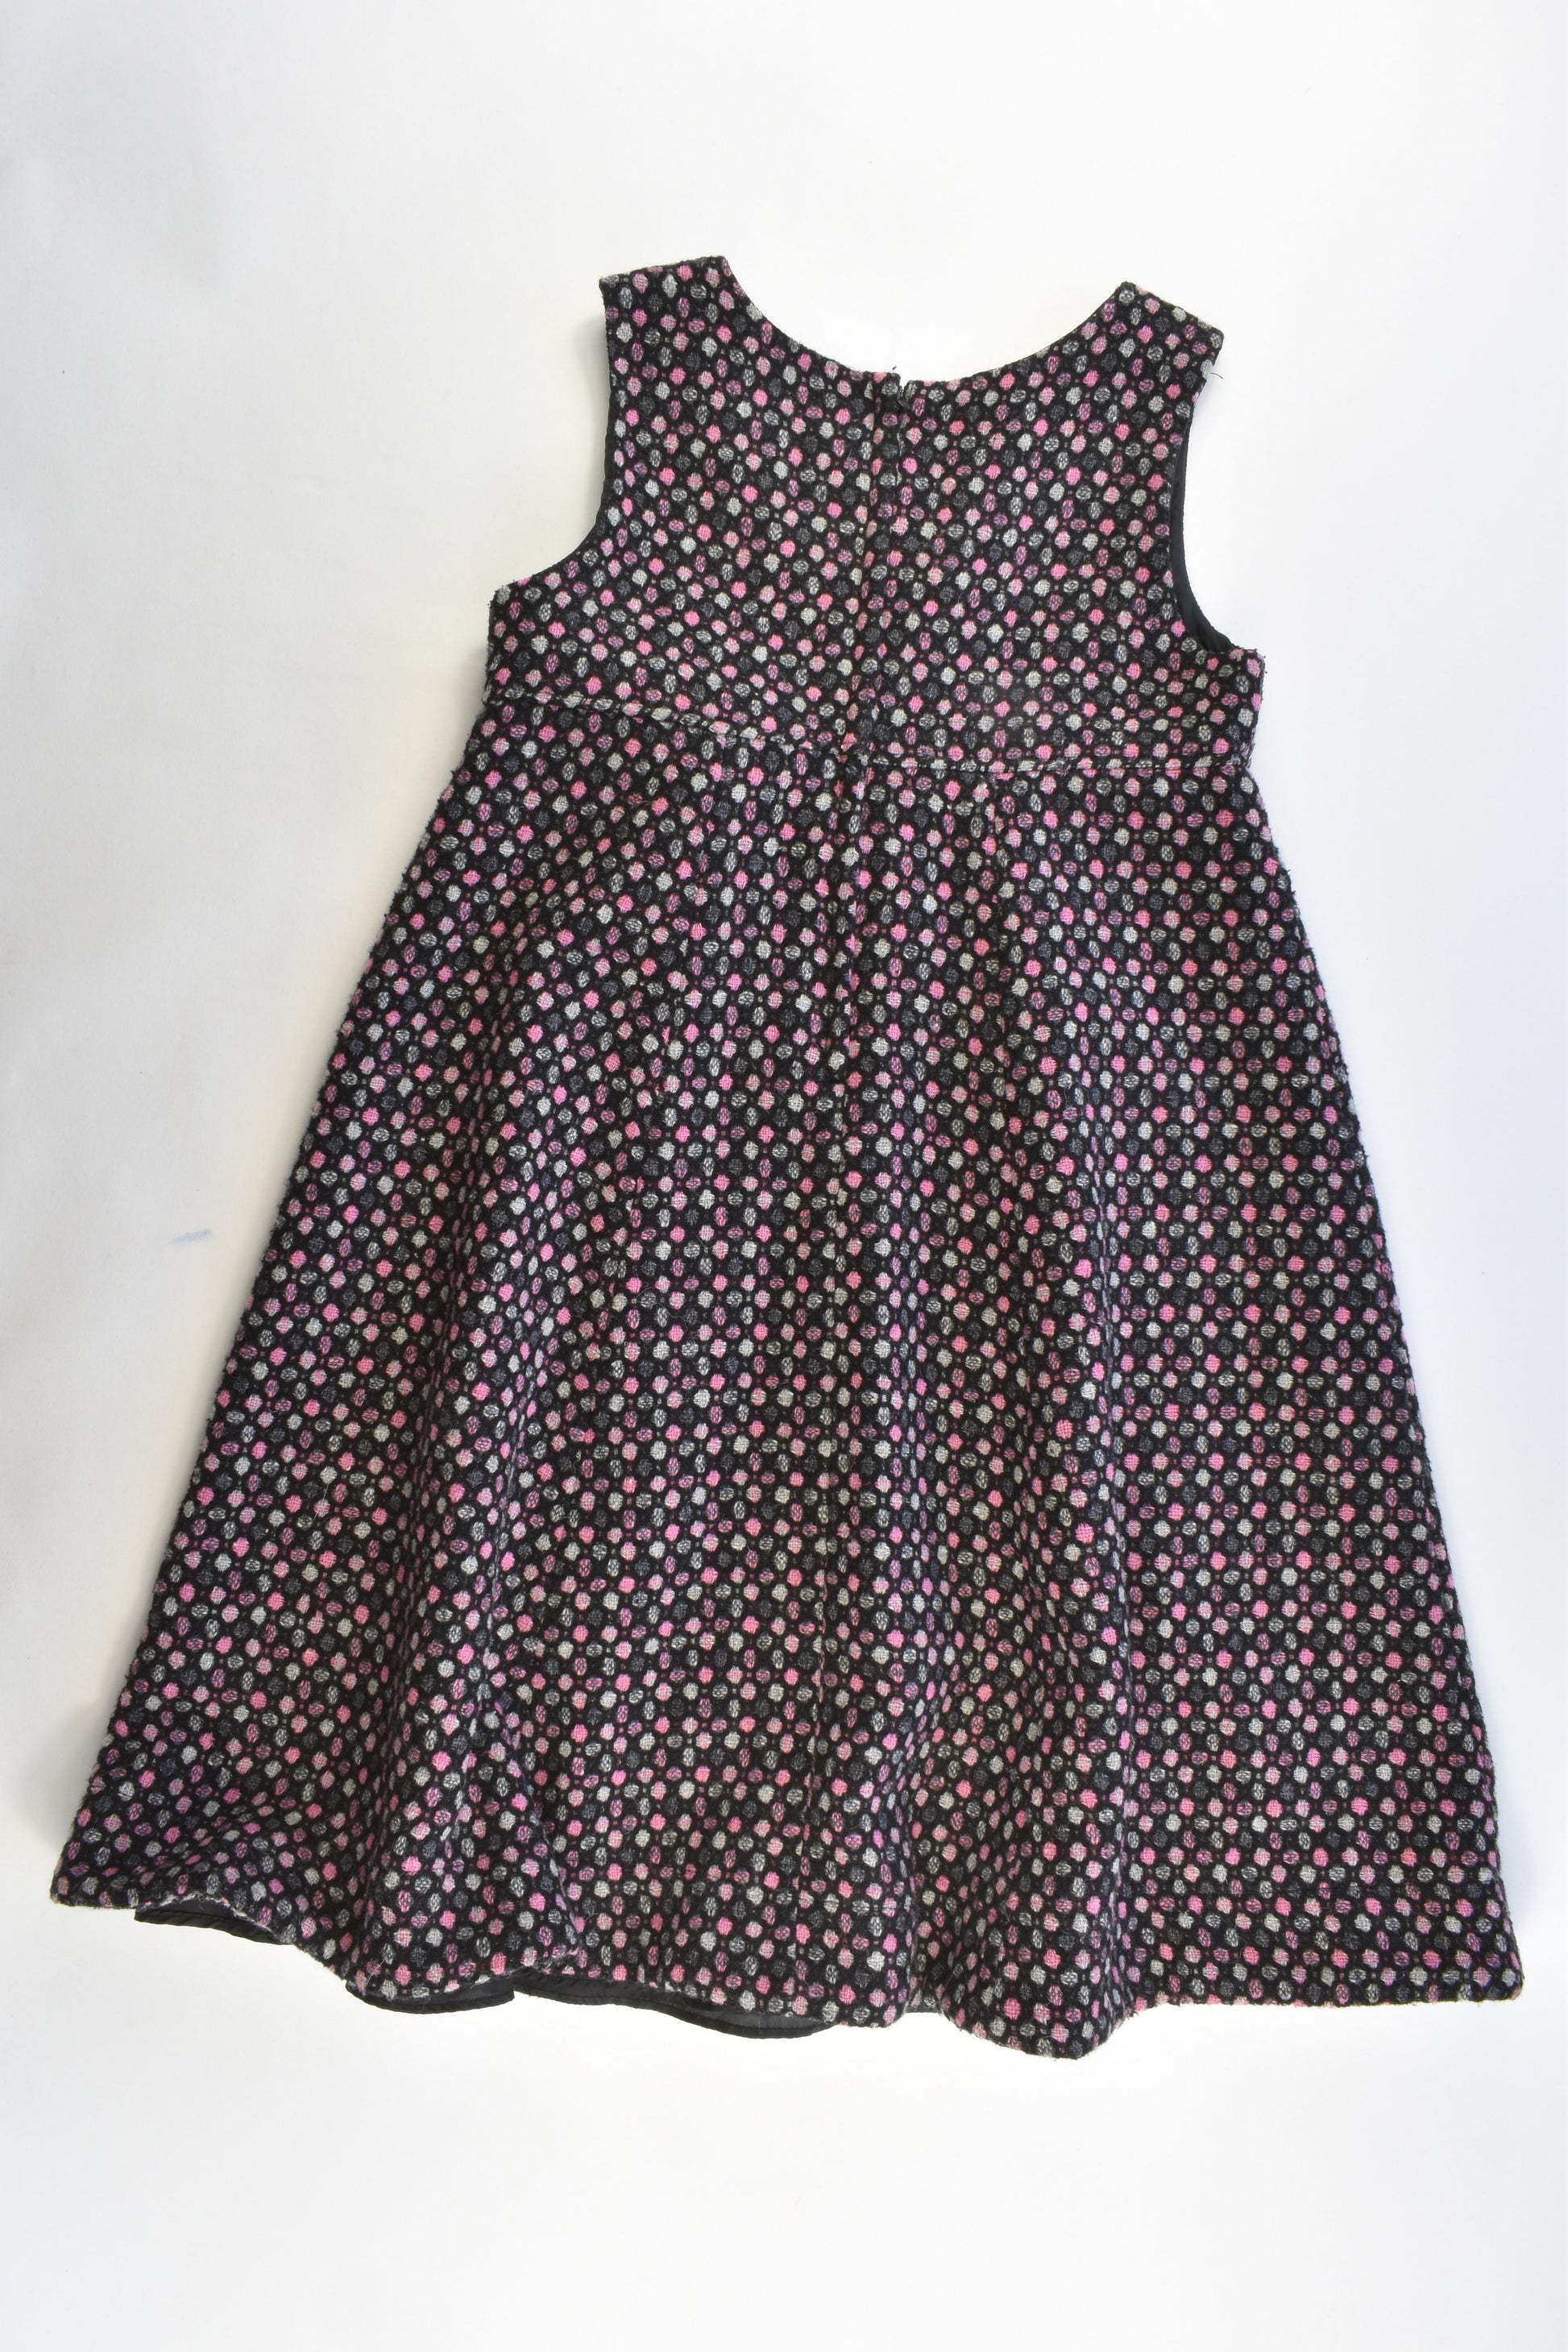 Origami Size 8 Lined Winter Woolly Dress